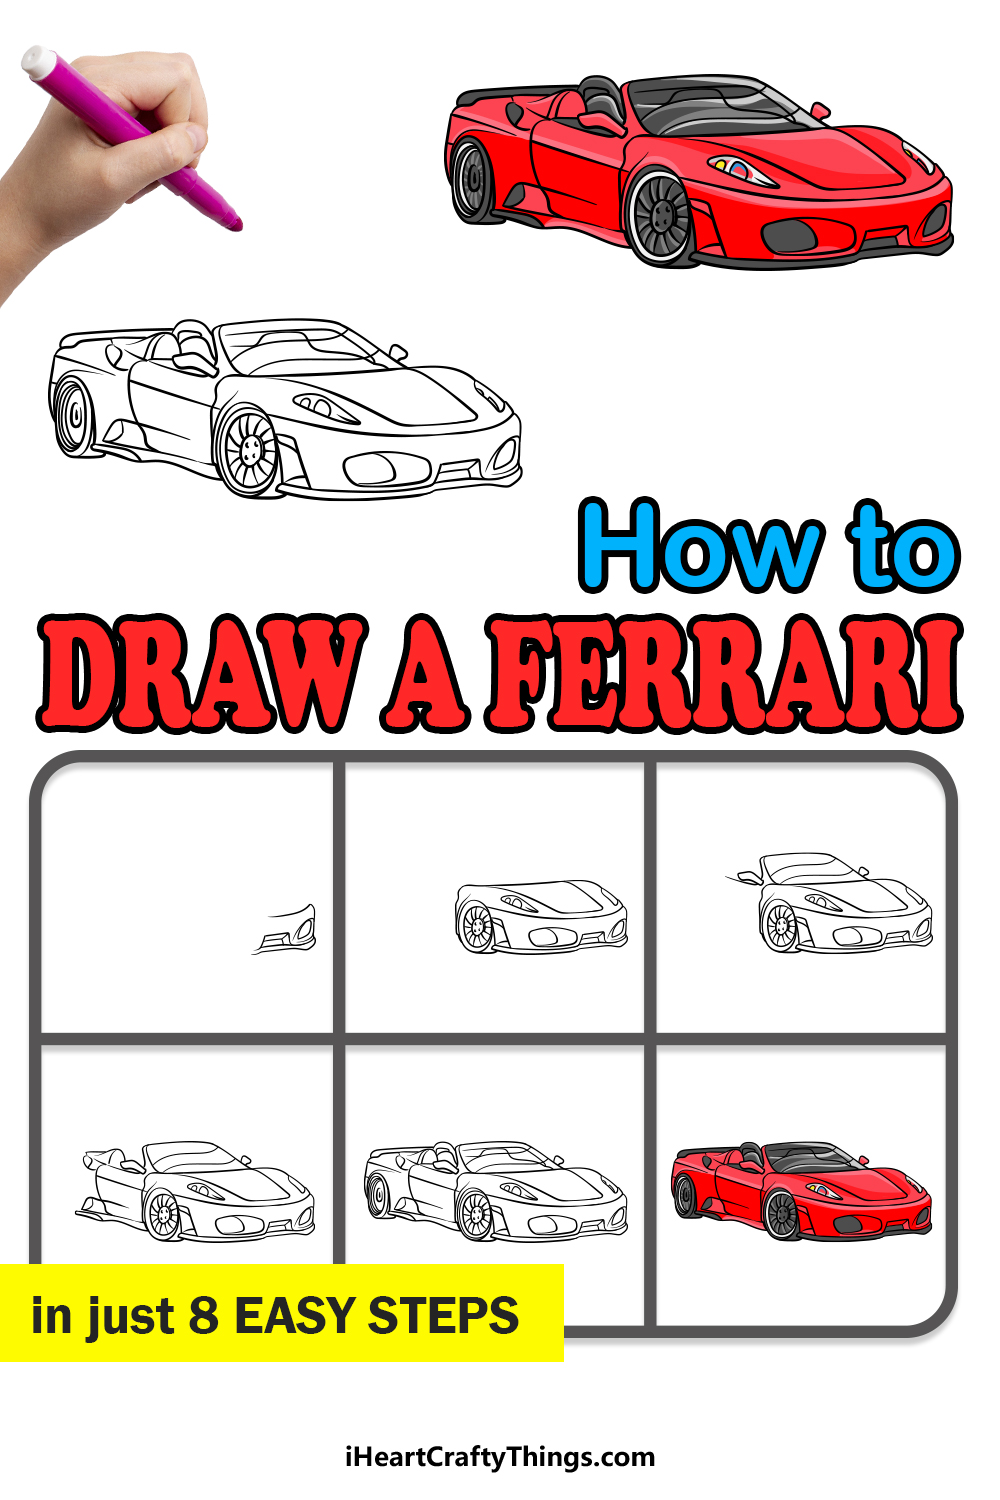 how to draw a ferrari in 8 easy steps